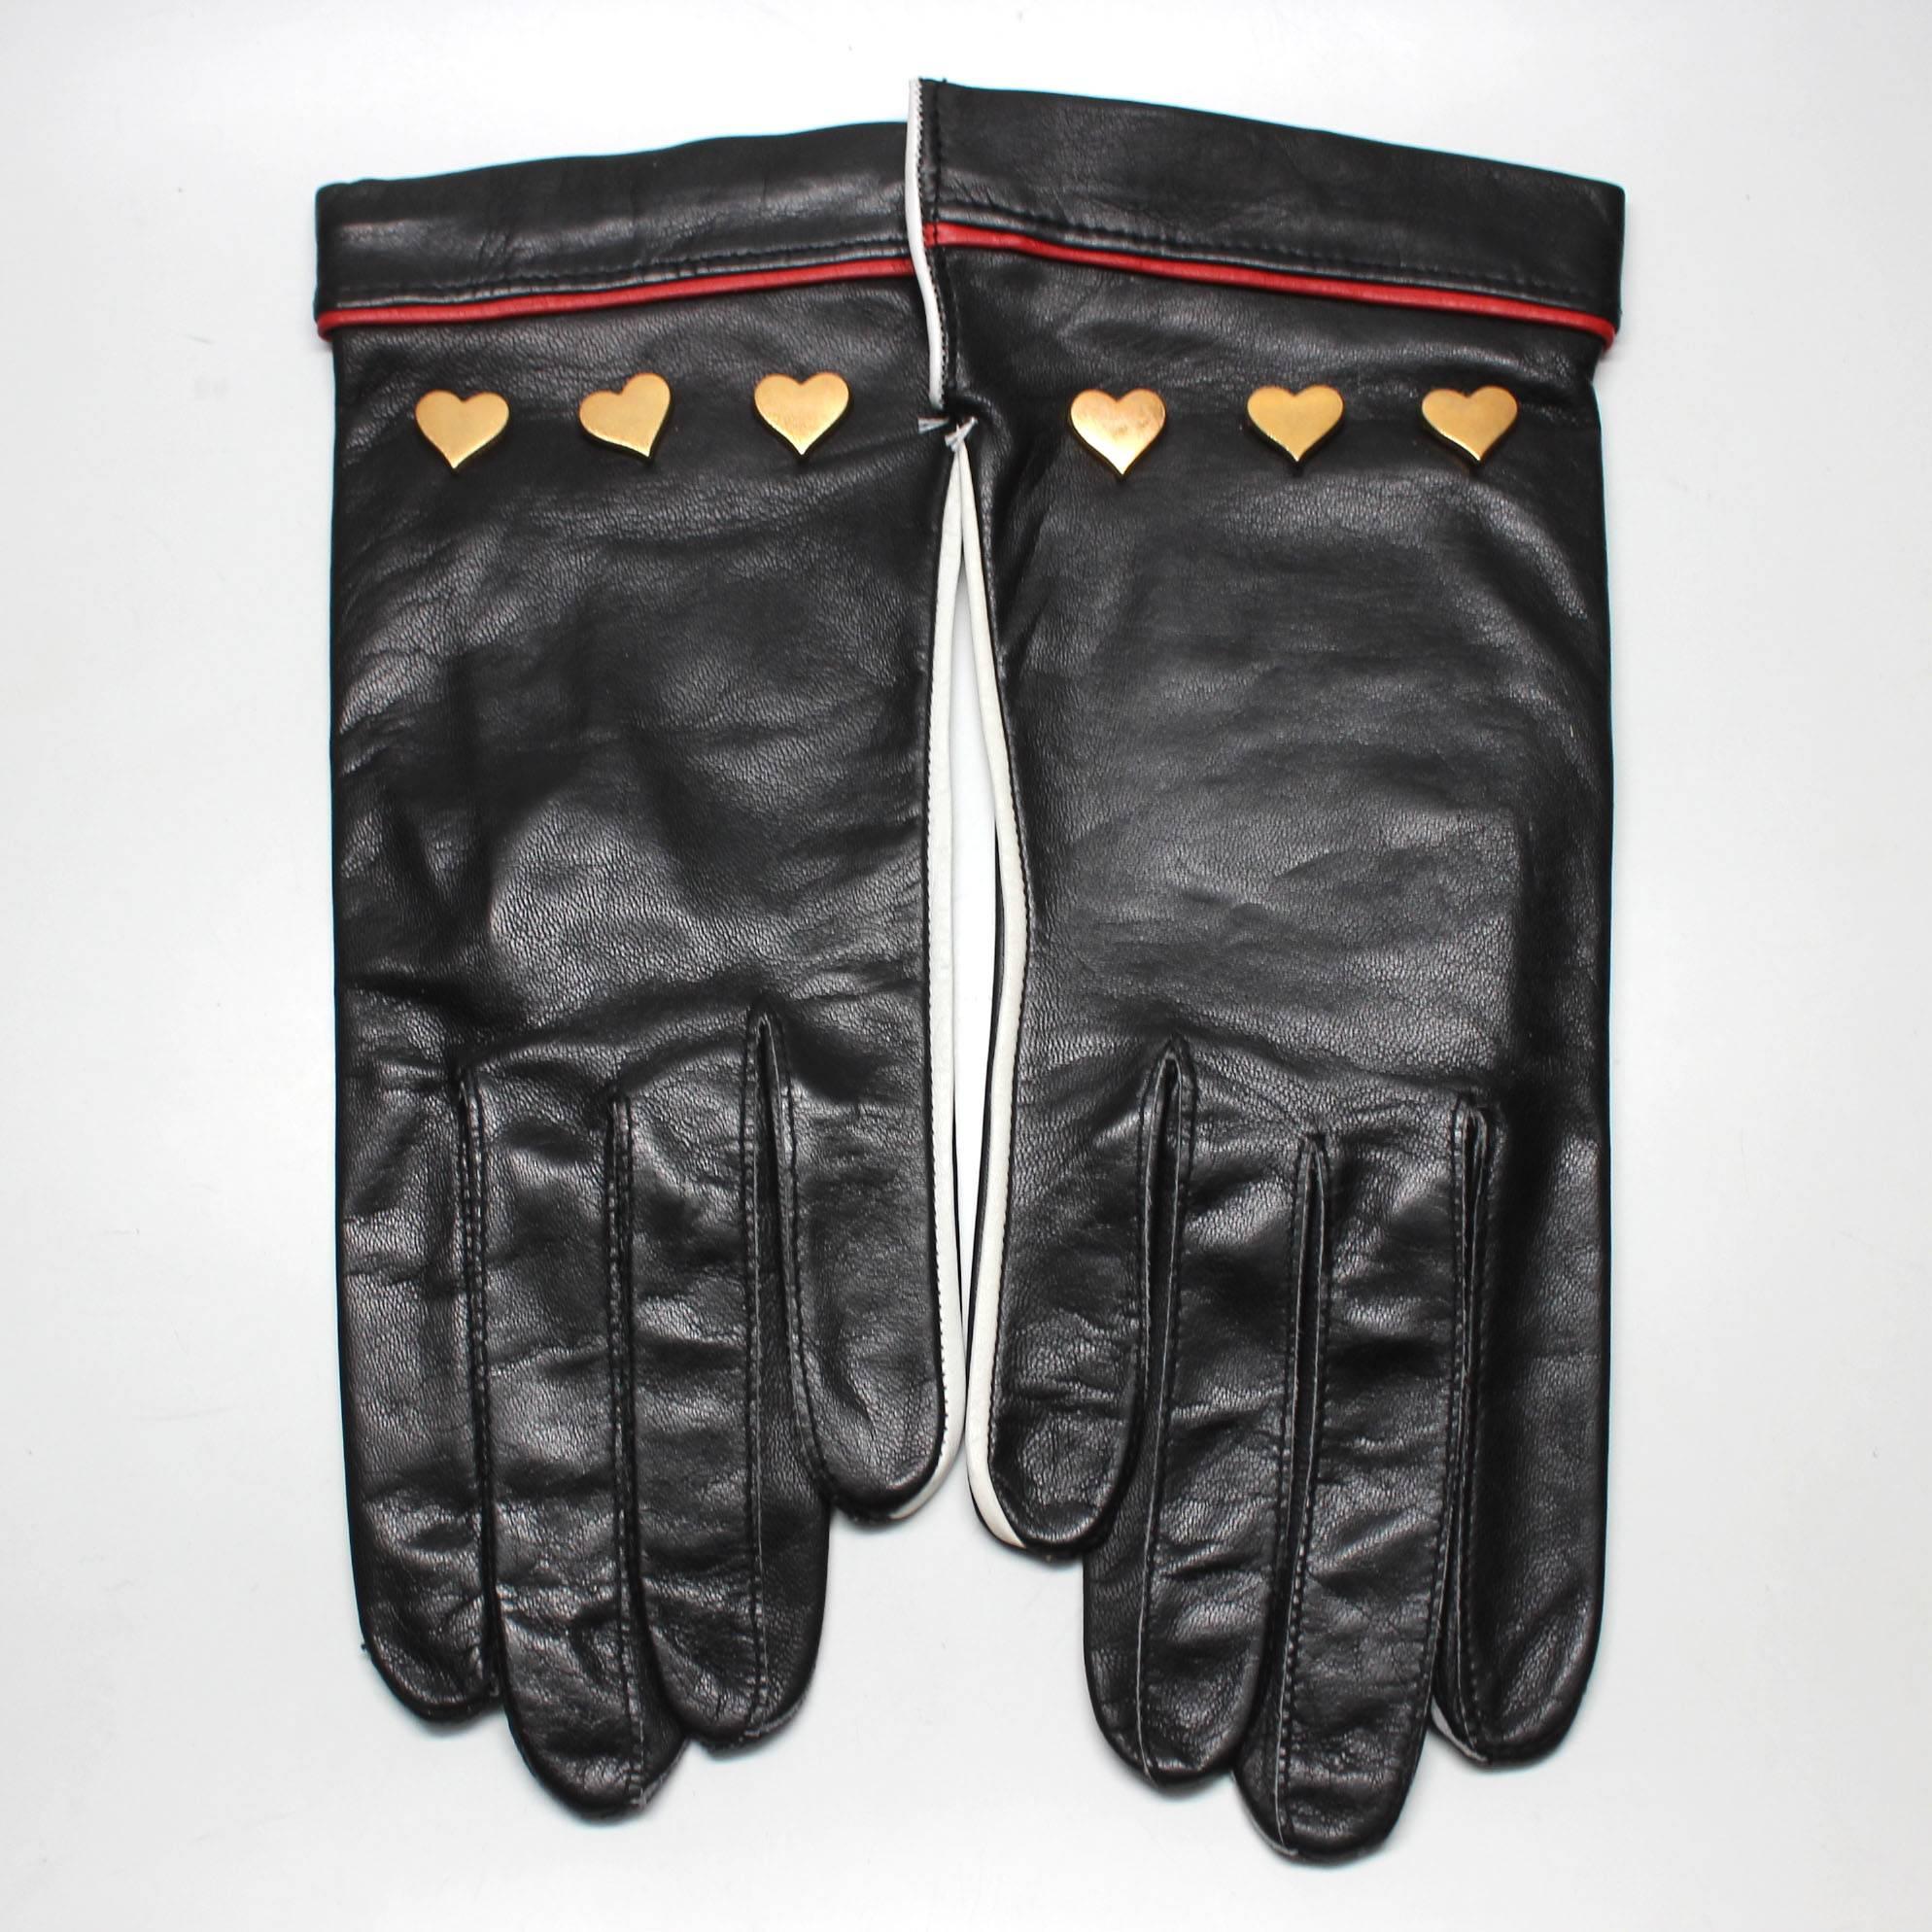 These 1980's Escada gloves are a rare find! Perfect for Valentines Day, and to add to any outfit, these black leather gloves have three gold heart studs on the front, red piping at the wrists, and white piping along the side. They have never been